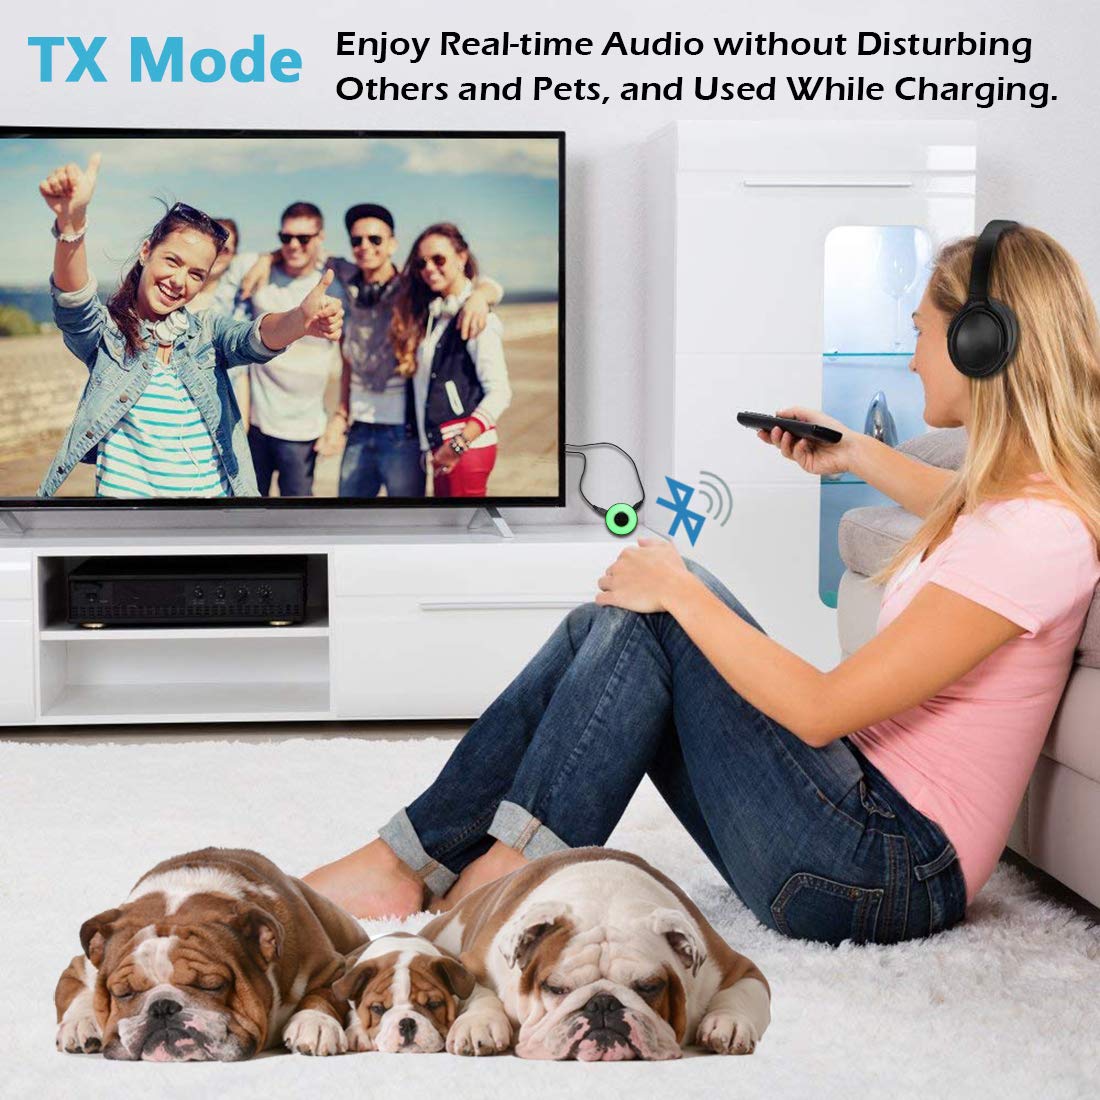 2-in-1-Wireless-bluetooth-Transmitter-Receiver-TX-RX-Mode-Receiver-for-Headphone-Phone-TV-Computer-1397566-5